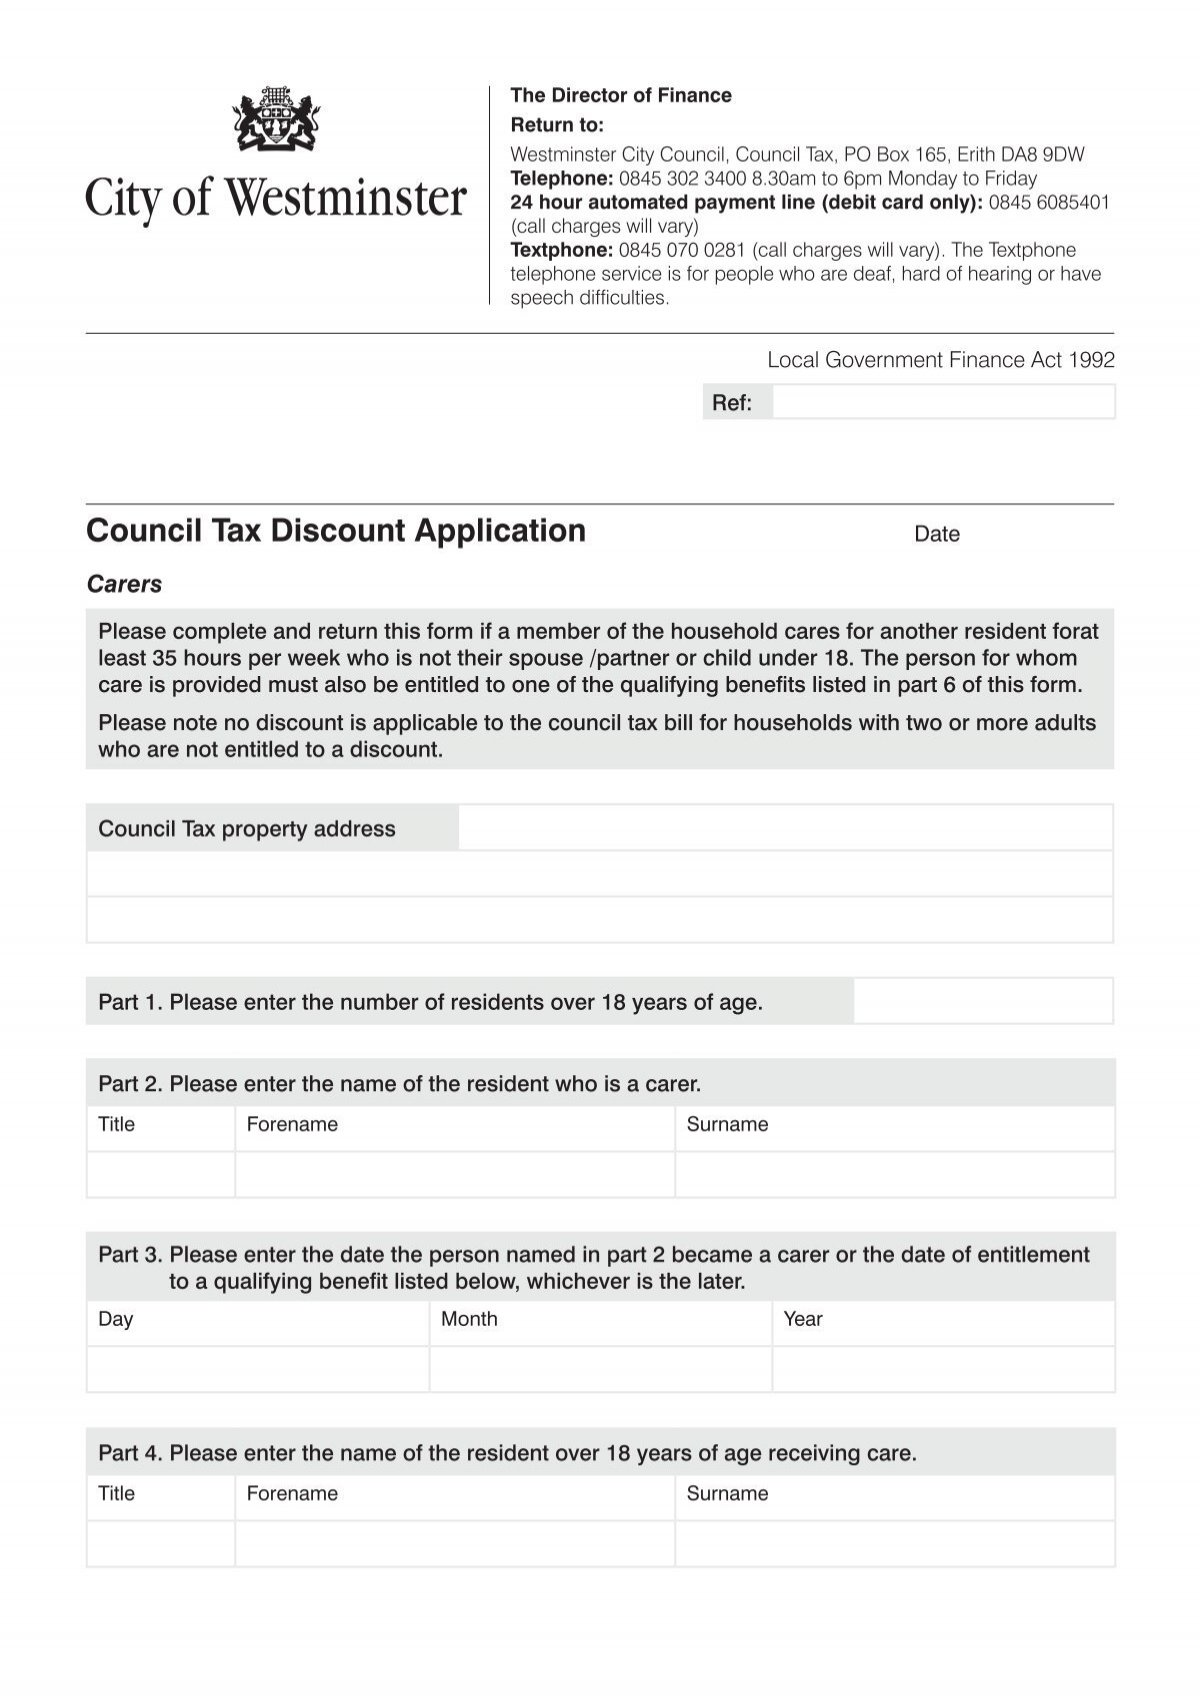 council-tax-discount-application-westminster-city-council